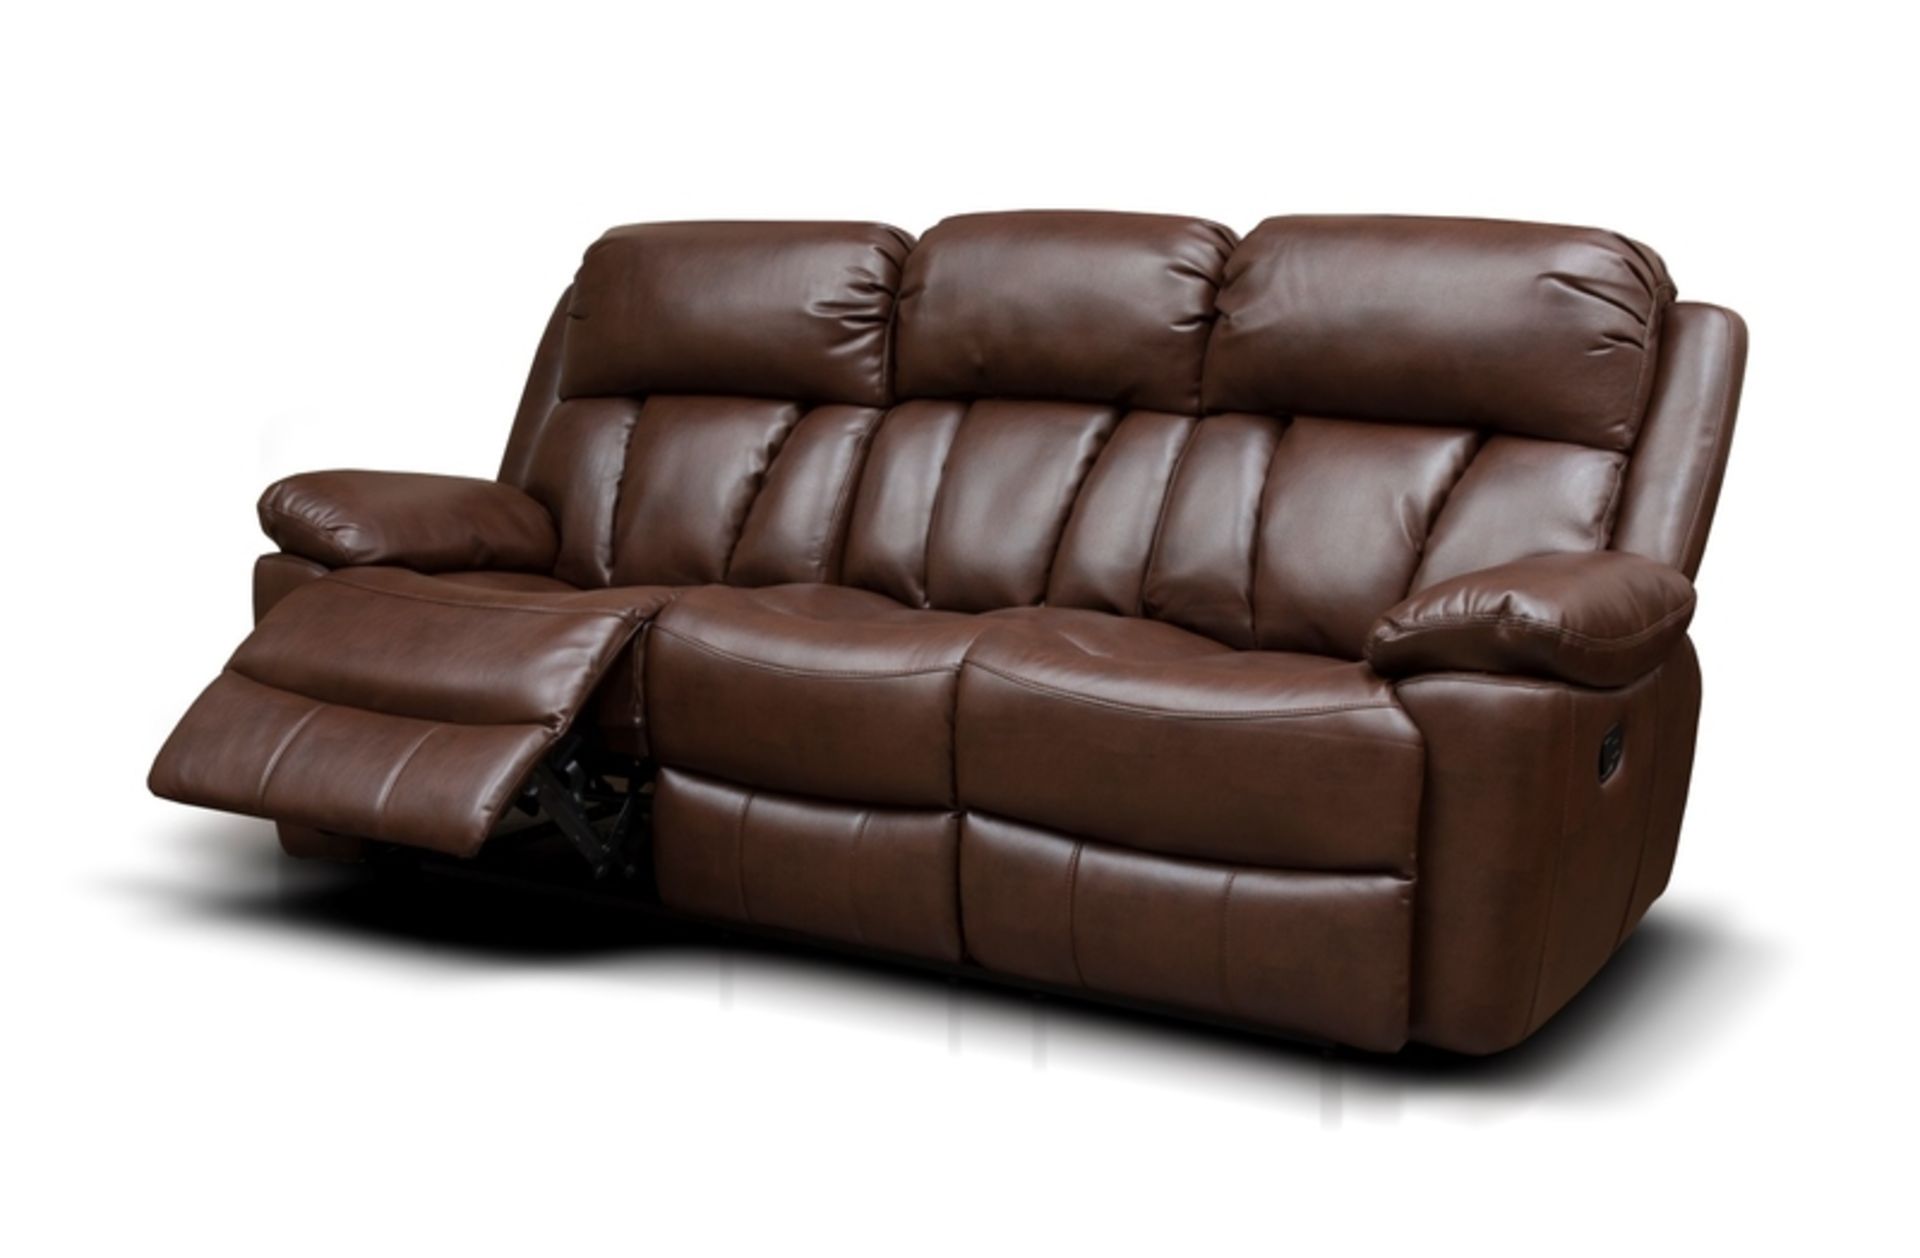 Brand New Boxed Benson 3 Seater Brown Leatheraire Reclining Sofa Plus 2 Matching Arm Chairs